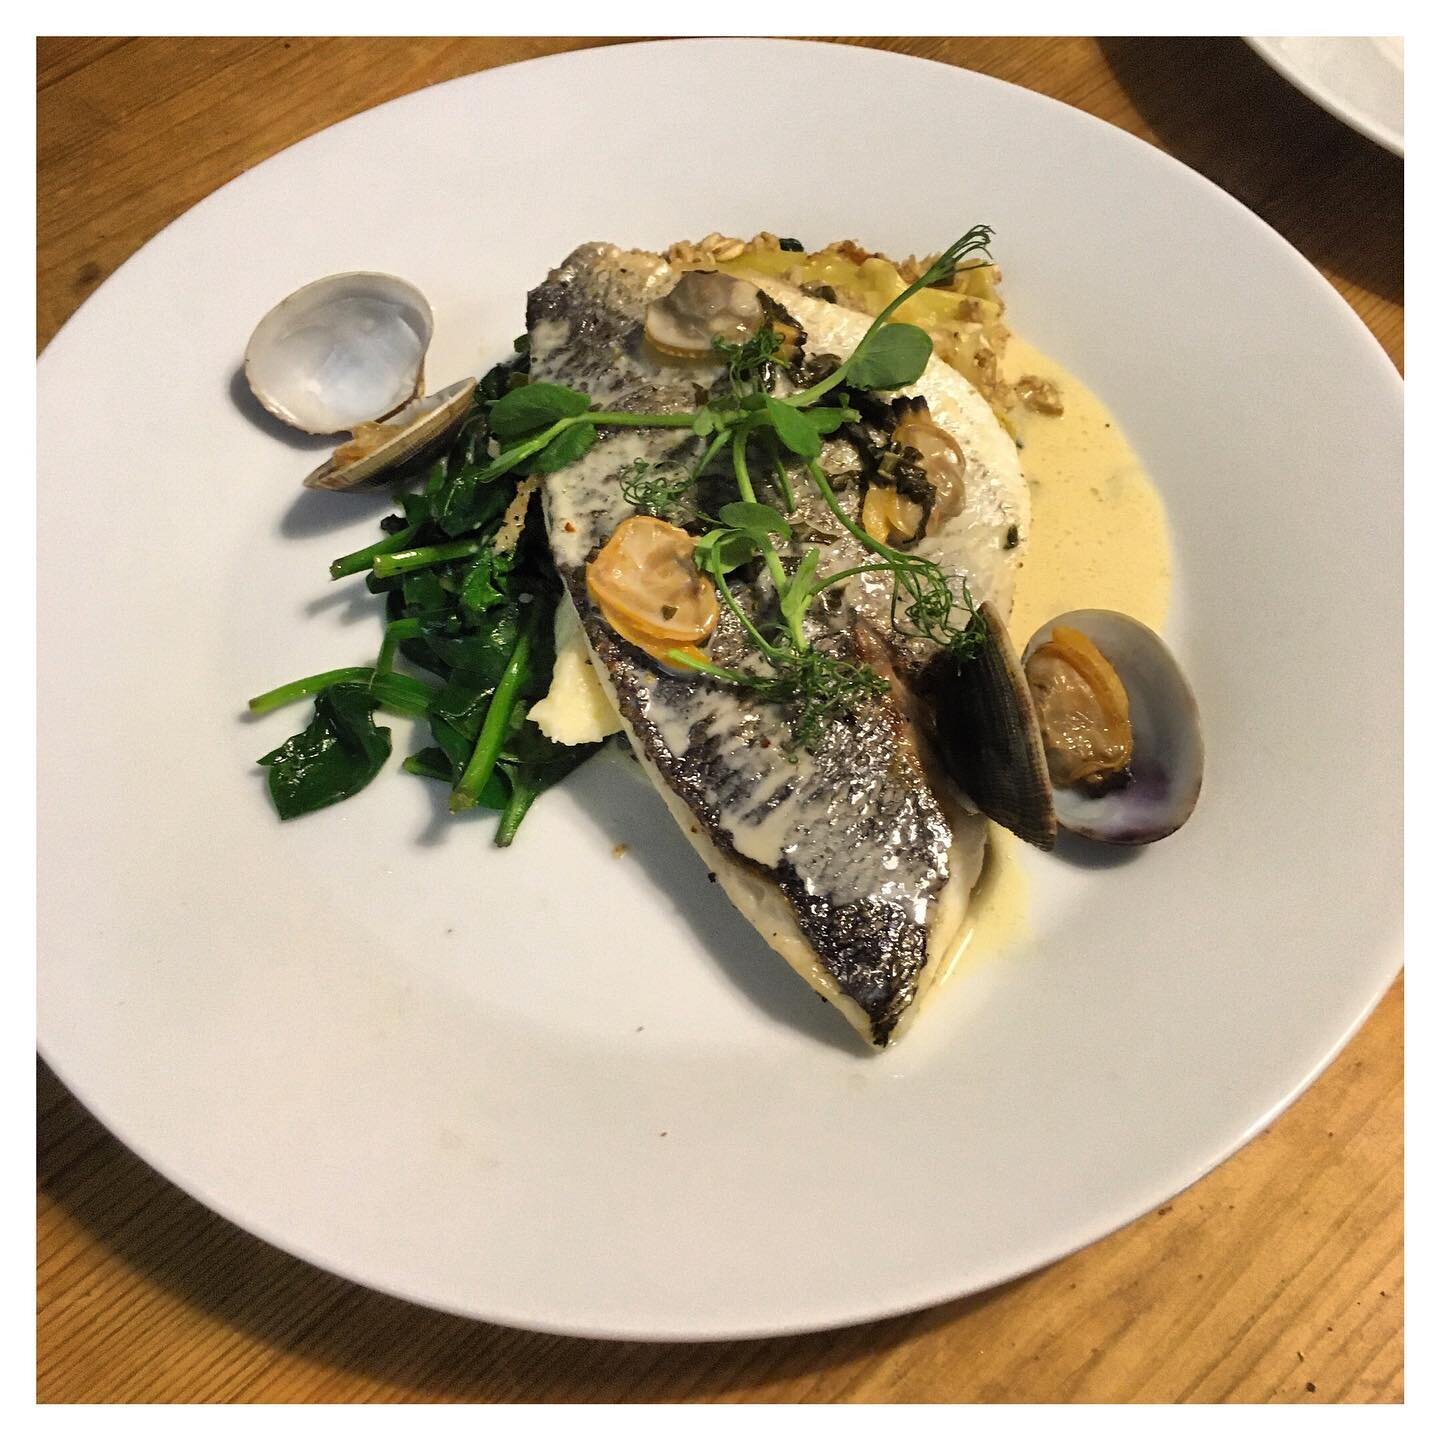 Autumn is definitely here! We would be very happy eating this dish right now - Pan-fried sea bream fillet with creamy mash, wilted spinach and a clam and tarragon sauce.